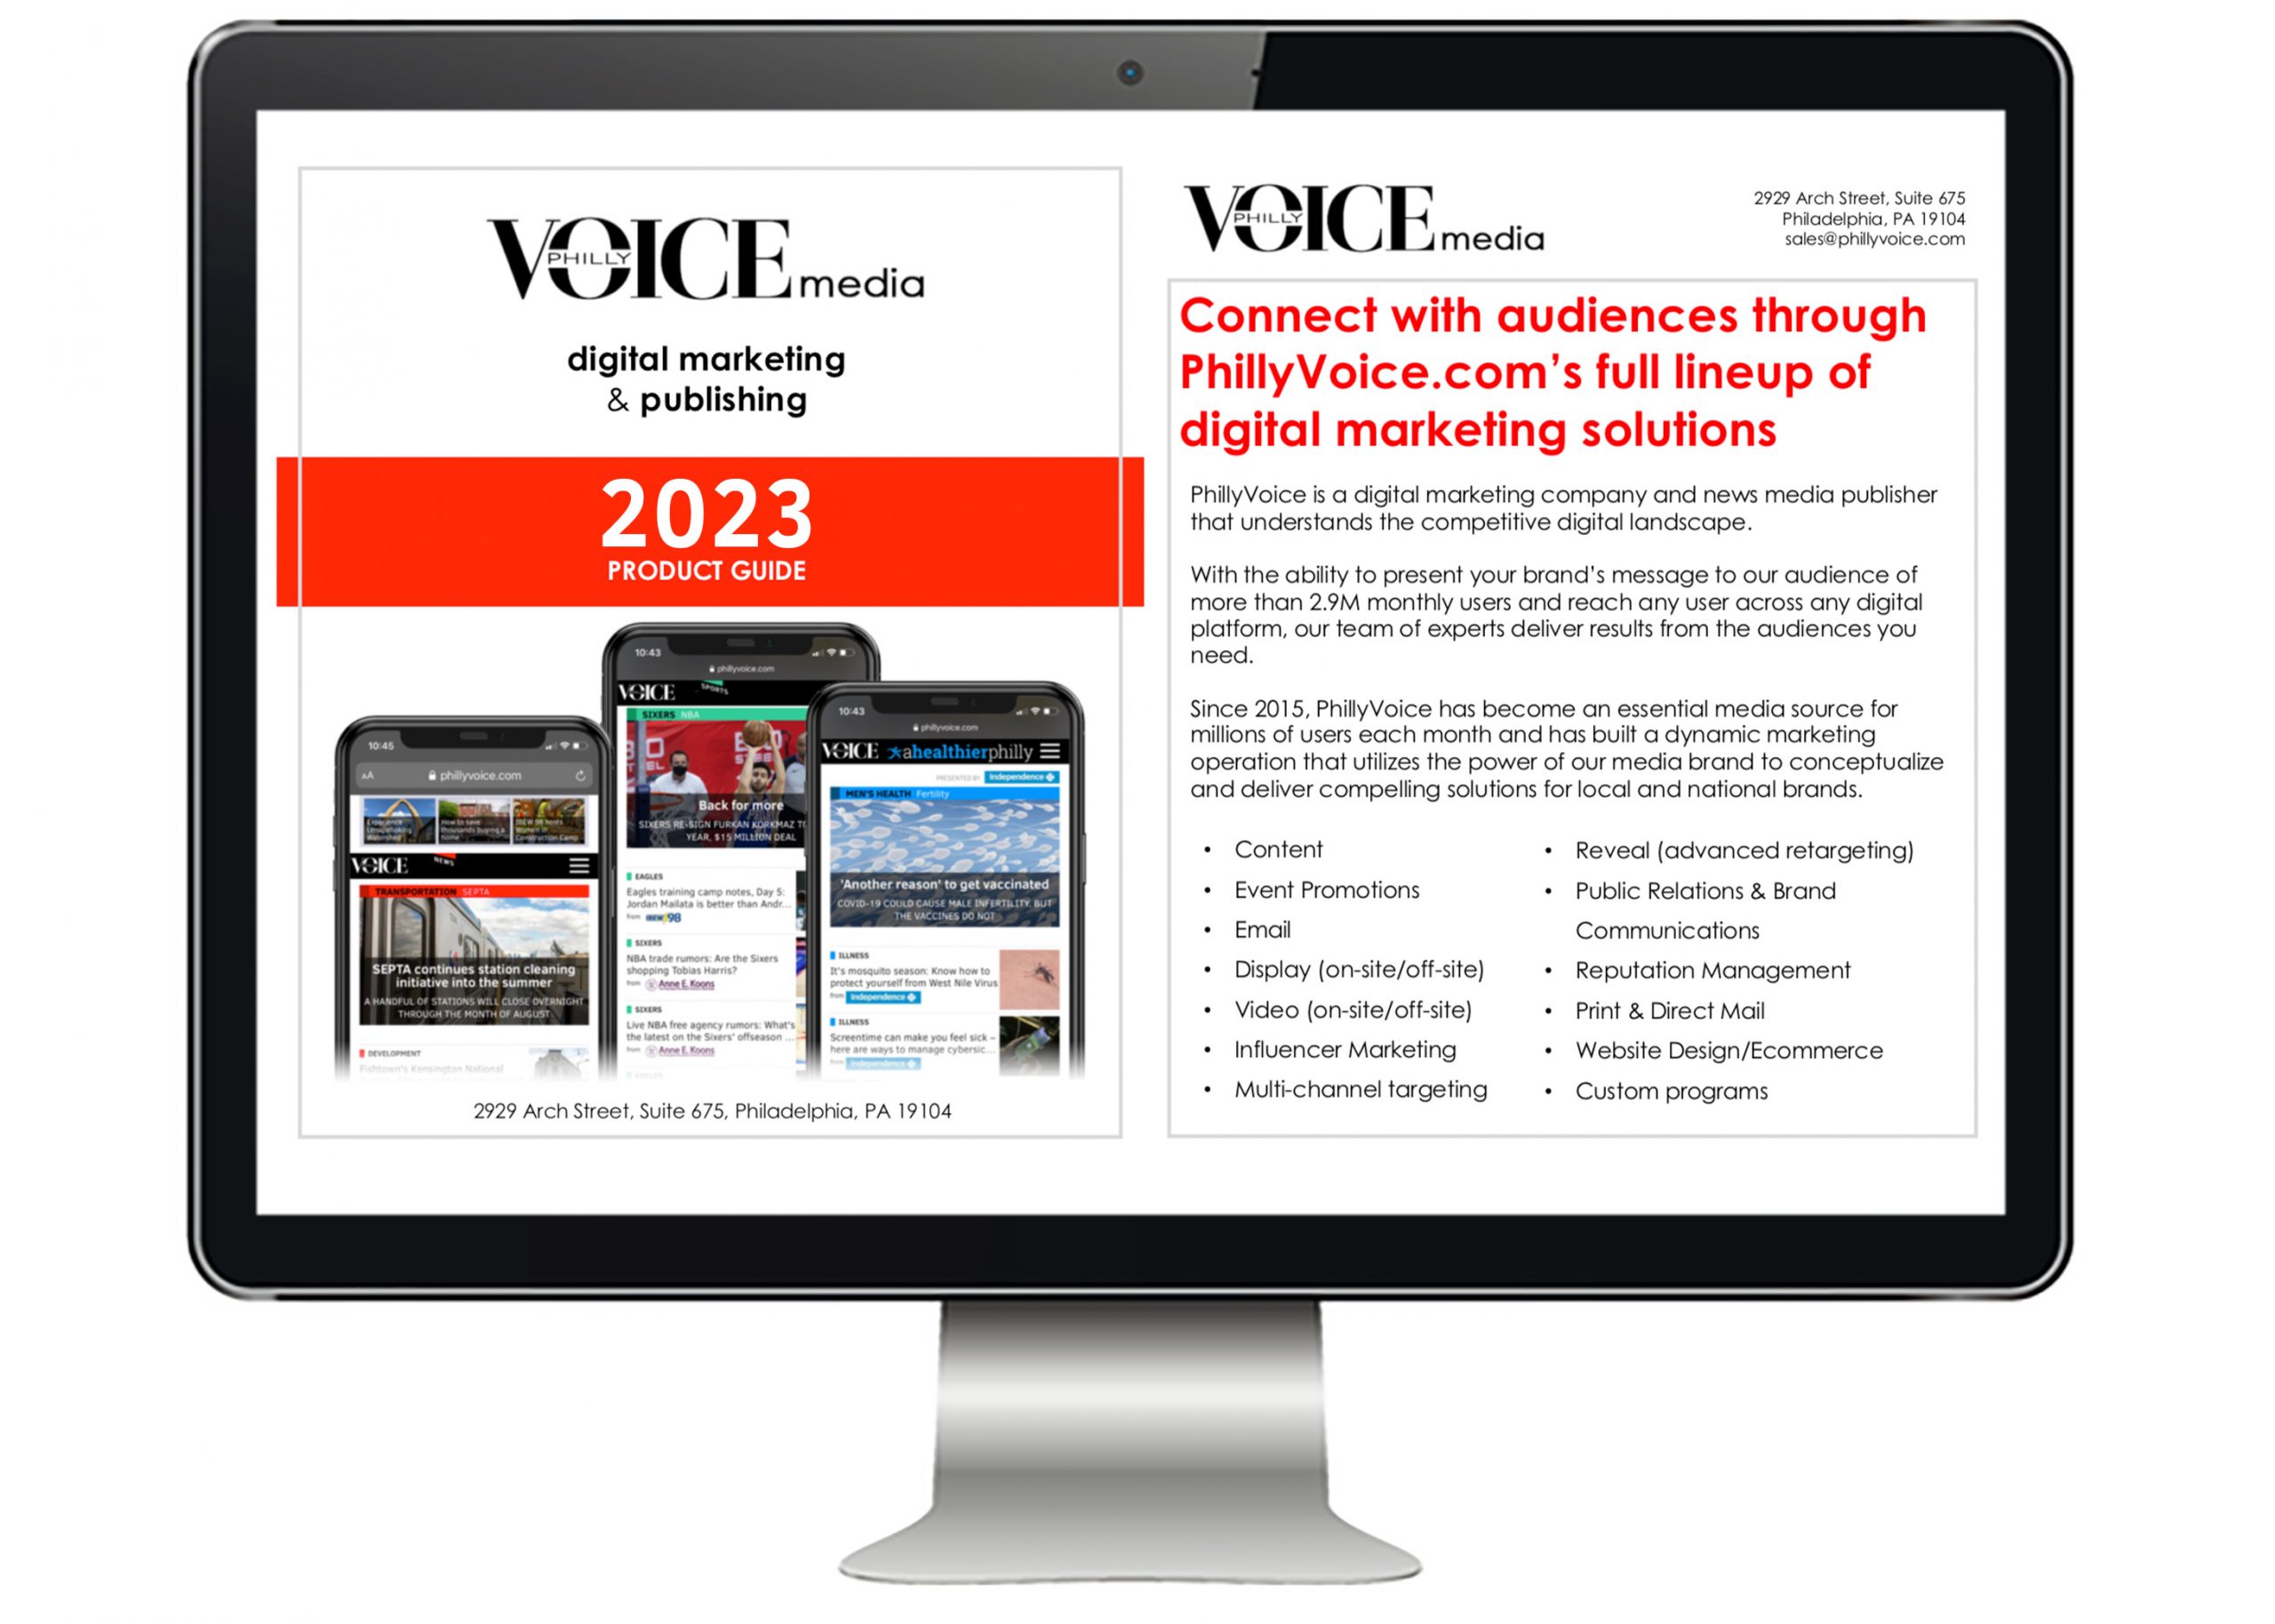 PhillyVoice Media Product Guide